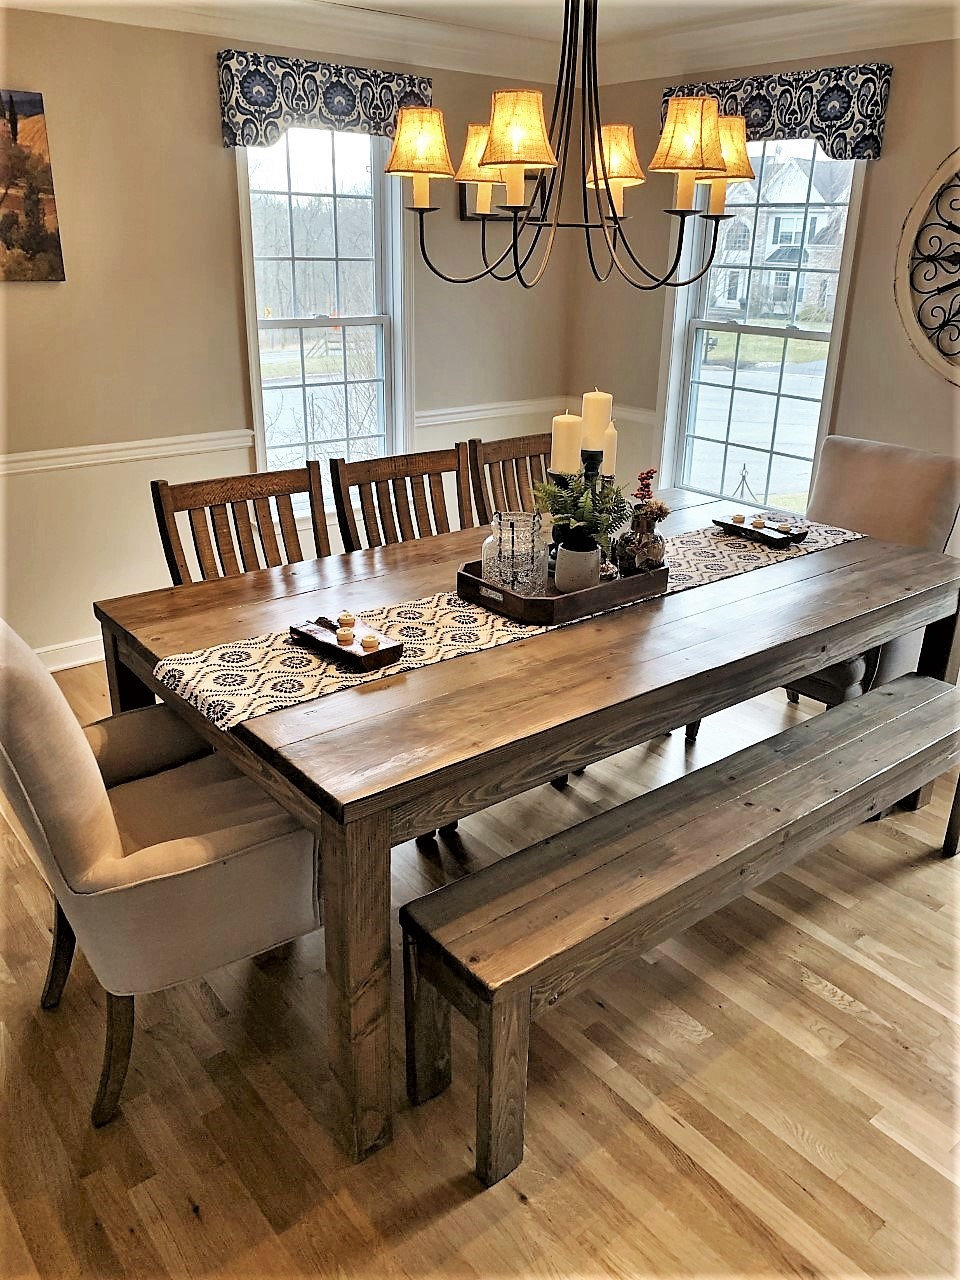 Rustic Farmhouse Dining Table, Farmhouse Dining Room Table And Chairs